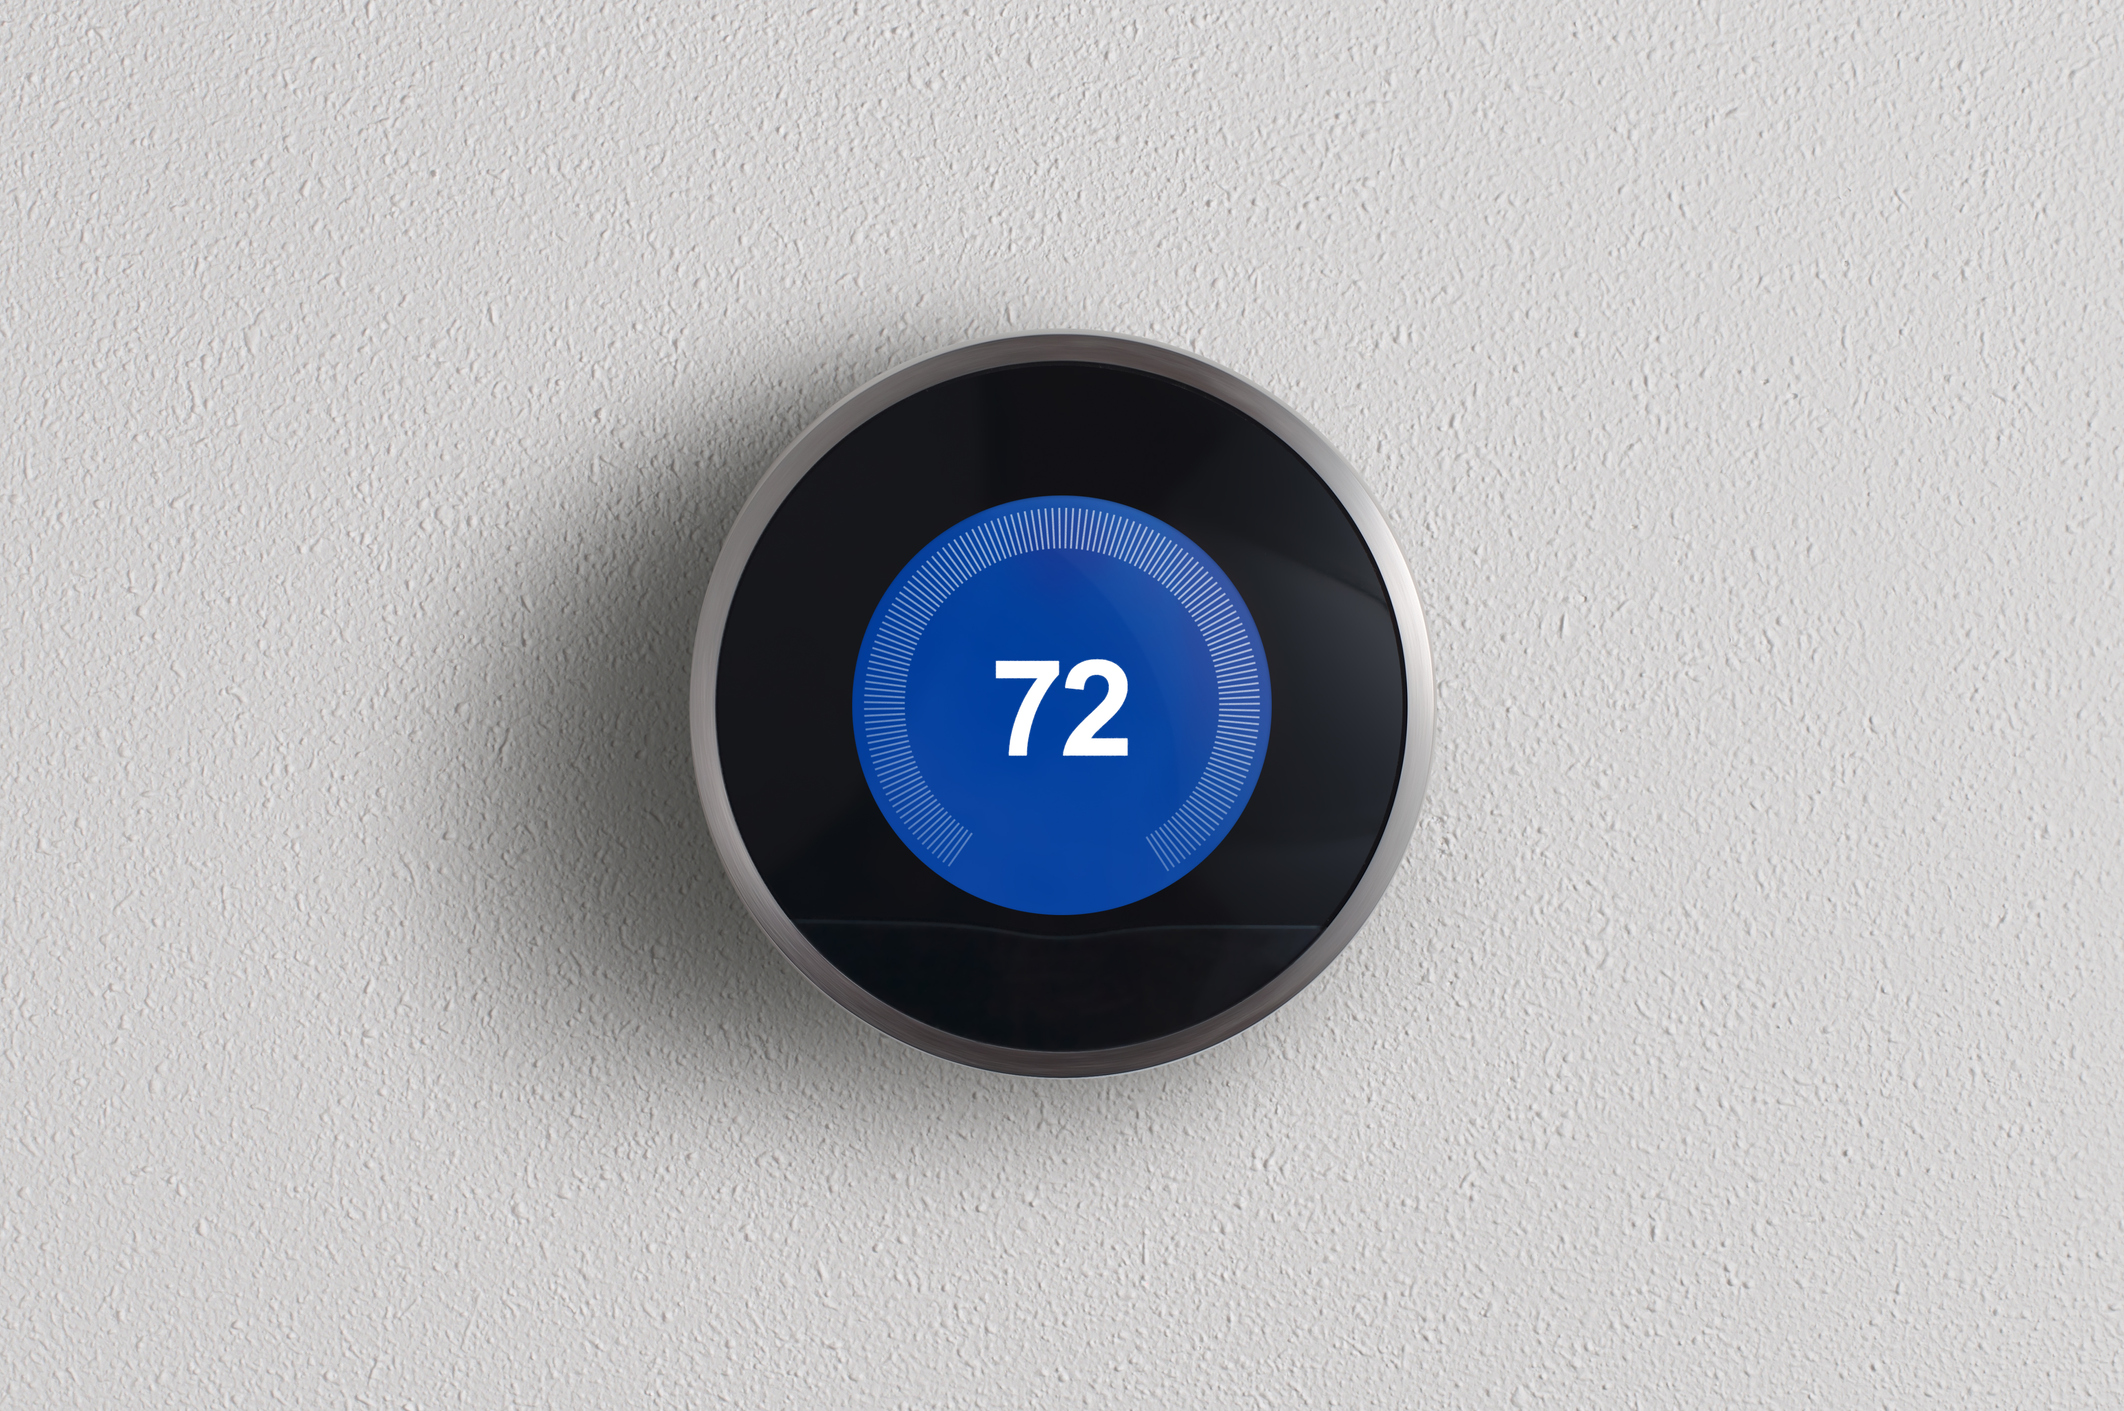 nest-thermostat-temperature-wrong